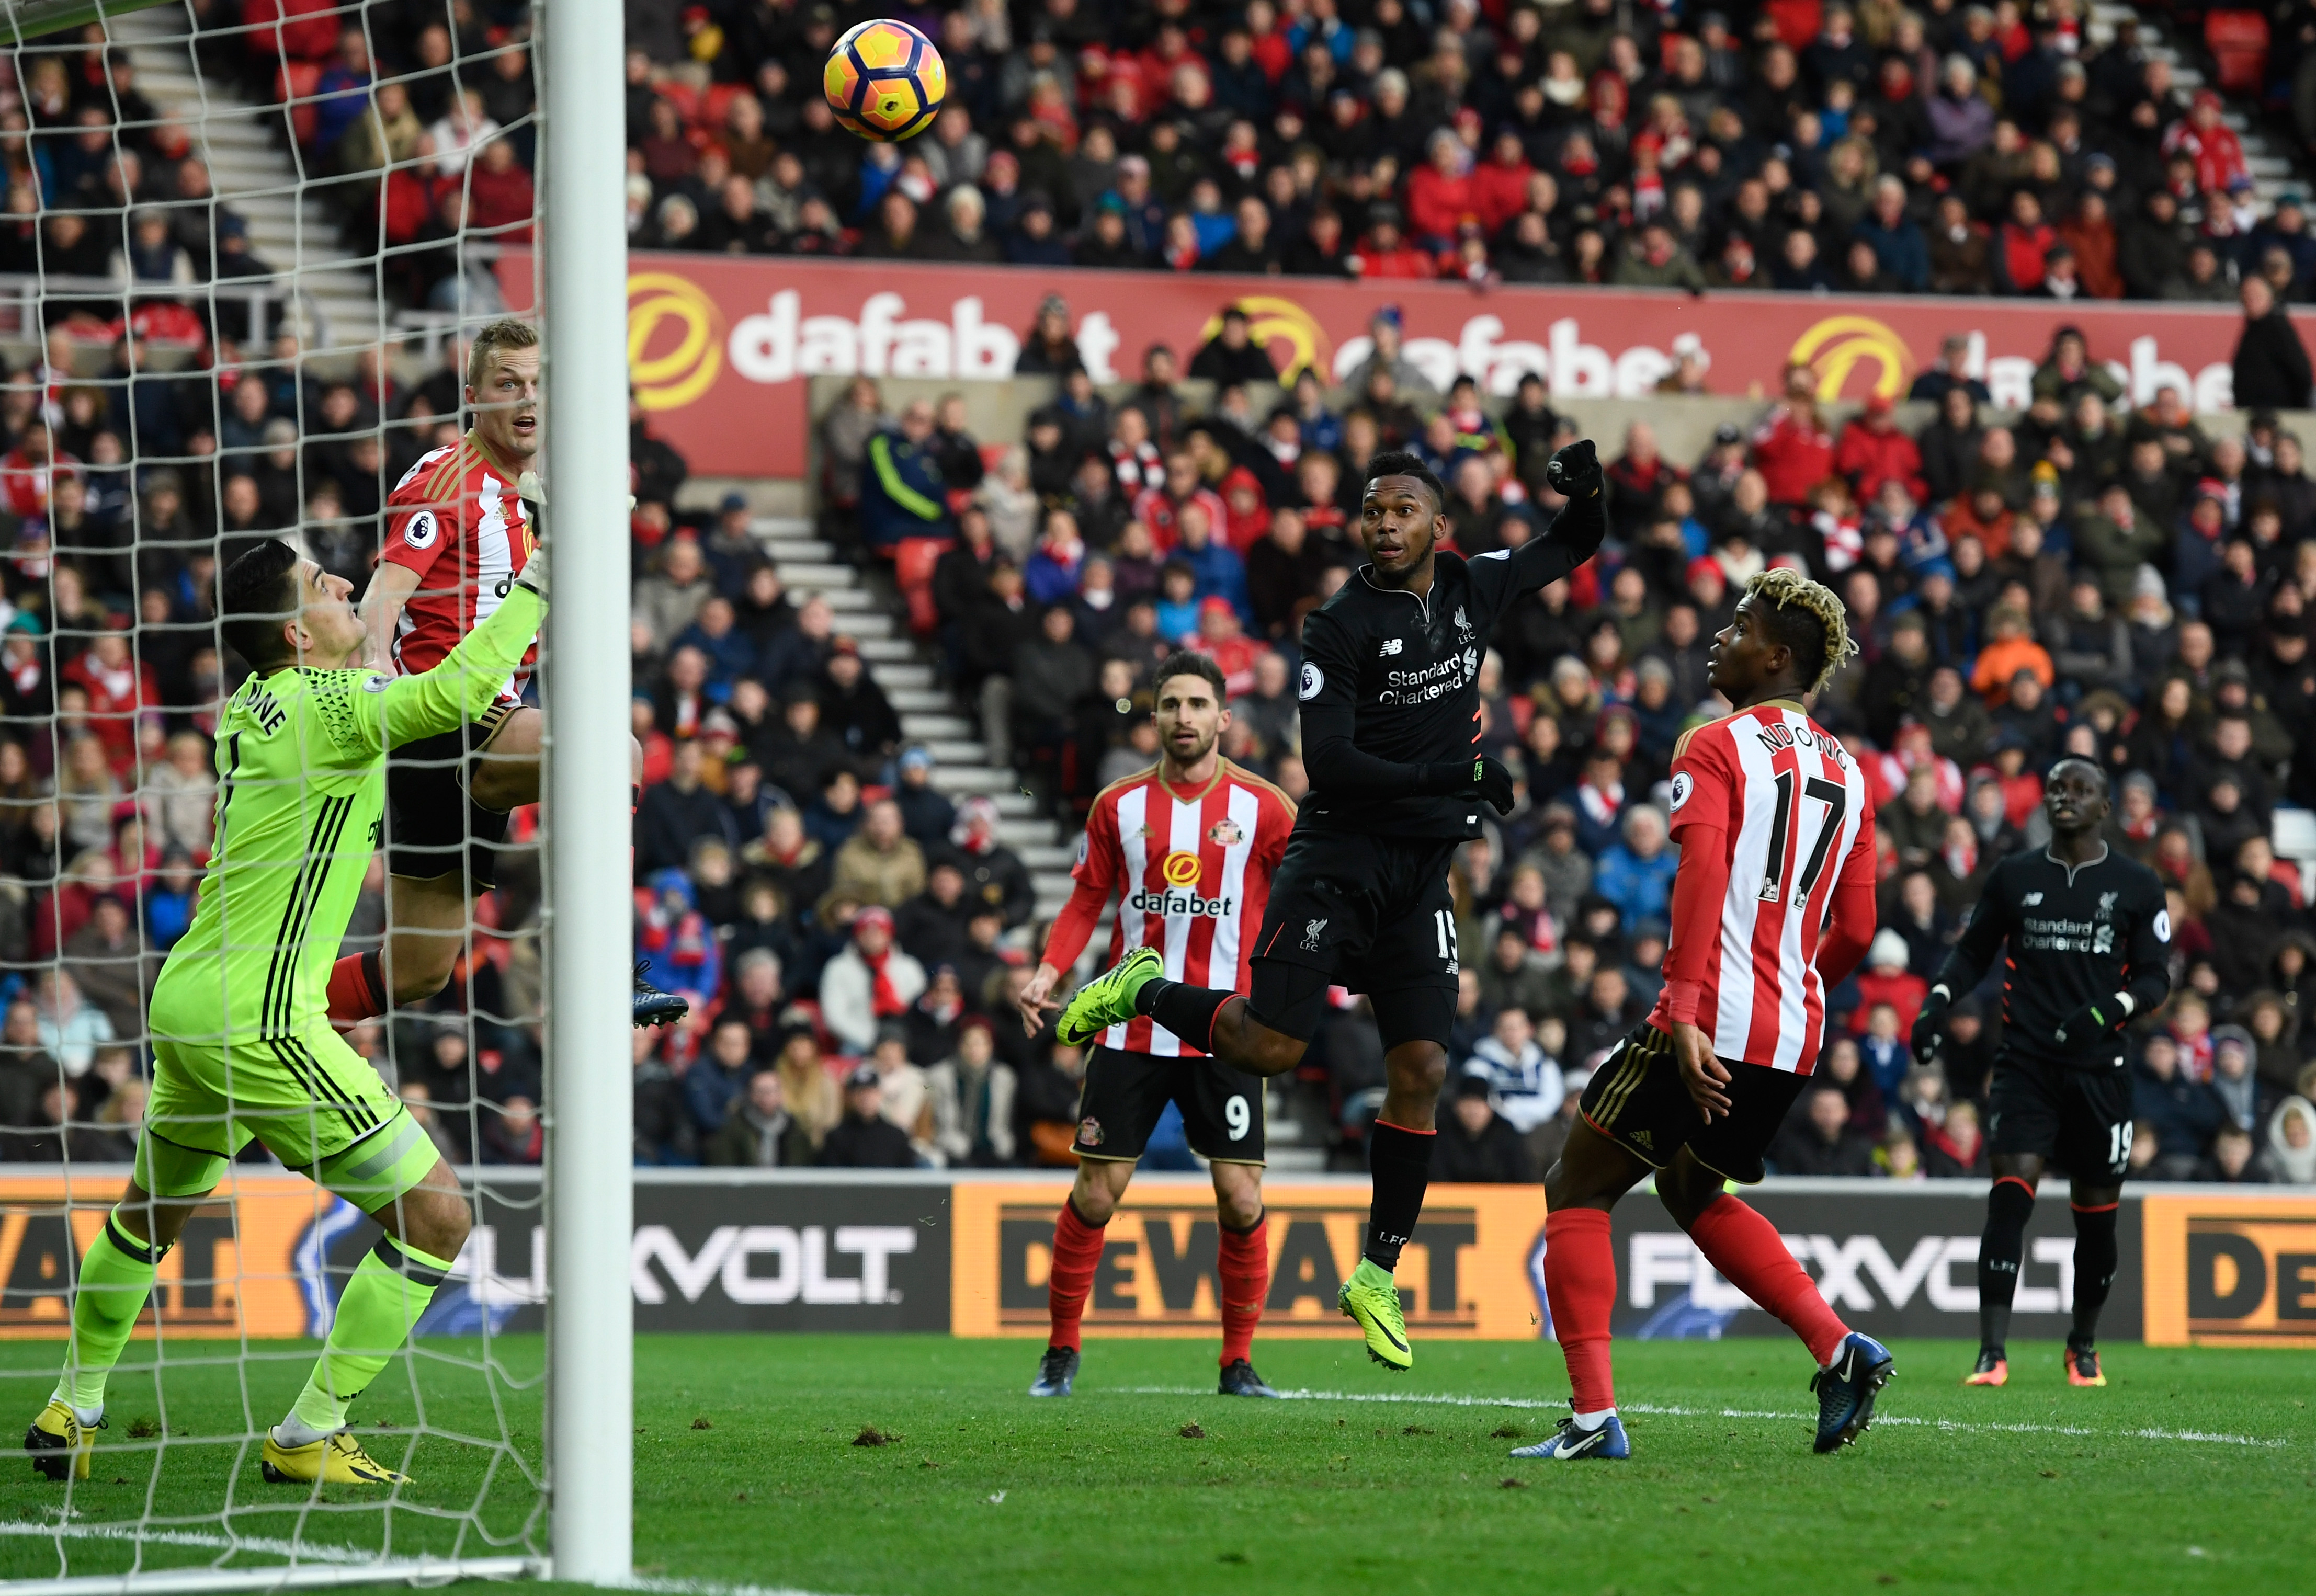 SUNDERLAND, ENGLAND - JANUARY 02:  Daniel Sturridge of Liverpool (C) scores his sides first goal past Vito Mannone of Sunderland (L) during the Premier League match between Sunderland and Liverpool at Stadium of Light on January 2, 2017 in Sunderland, England.  (Photo by Stu Forster/Getty Images)